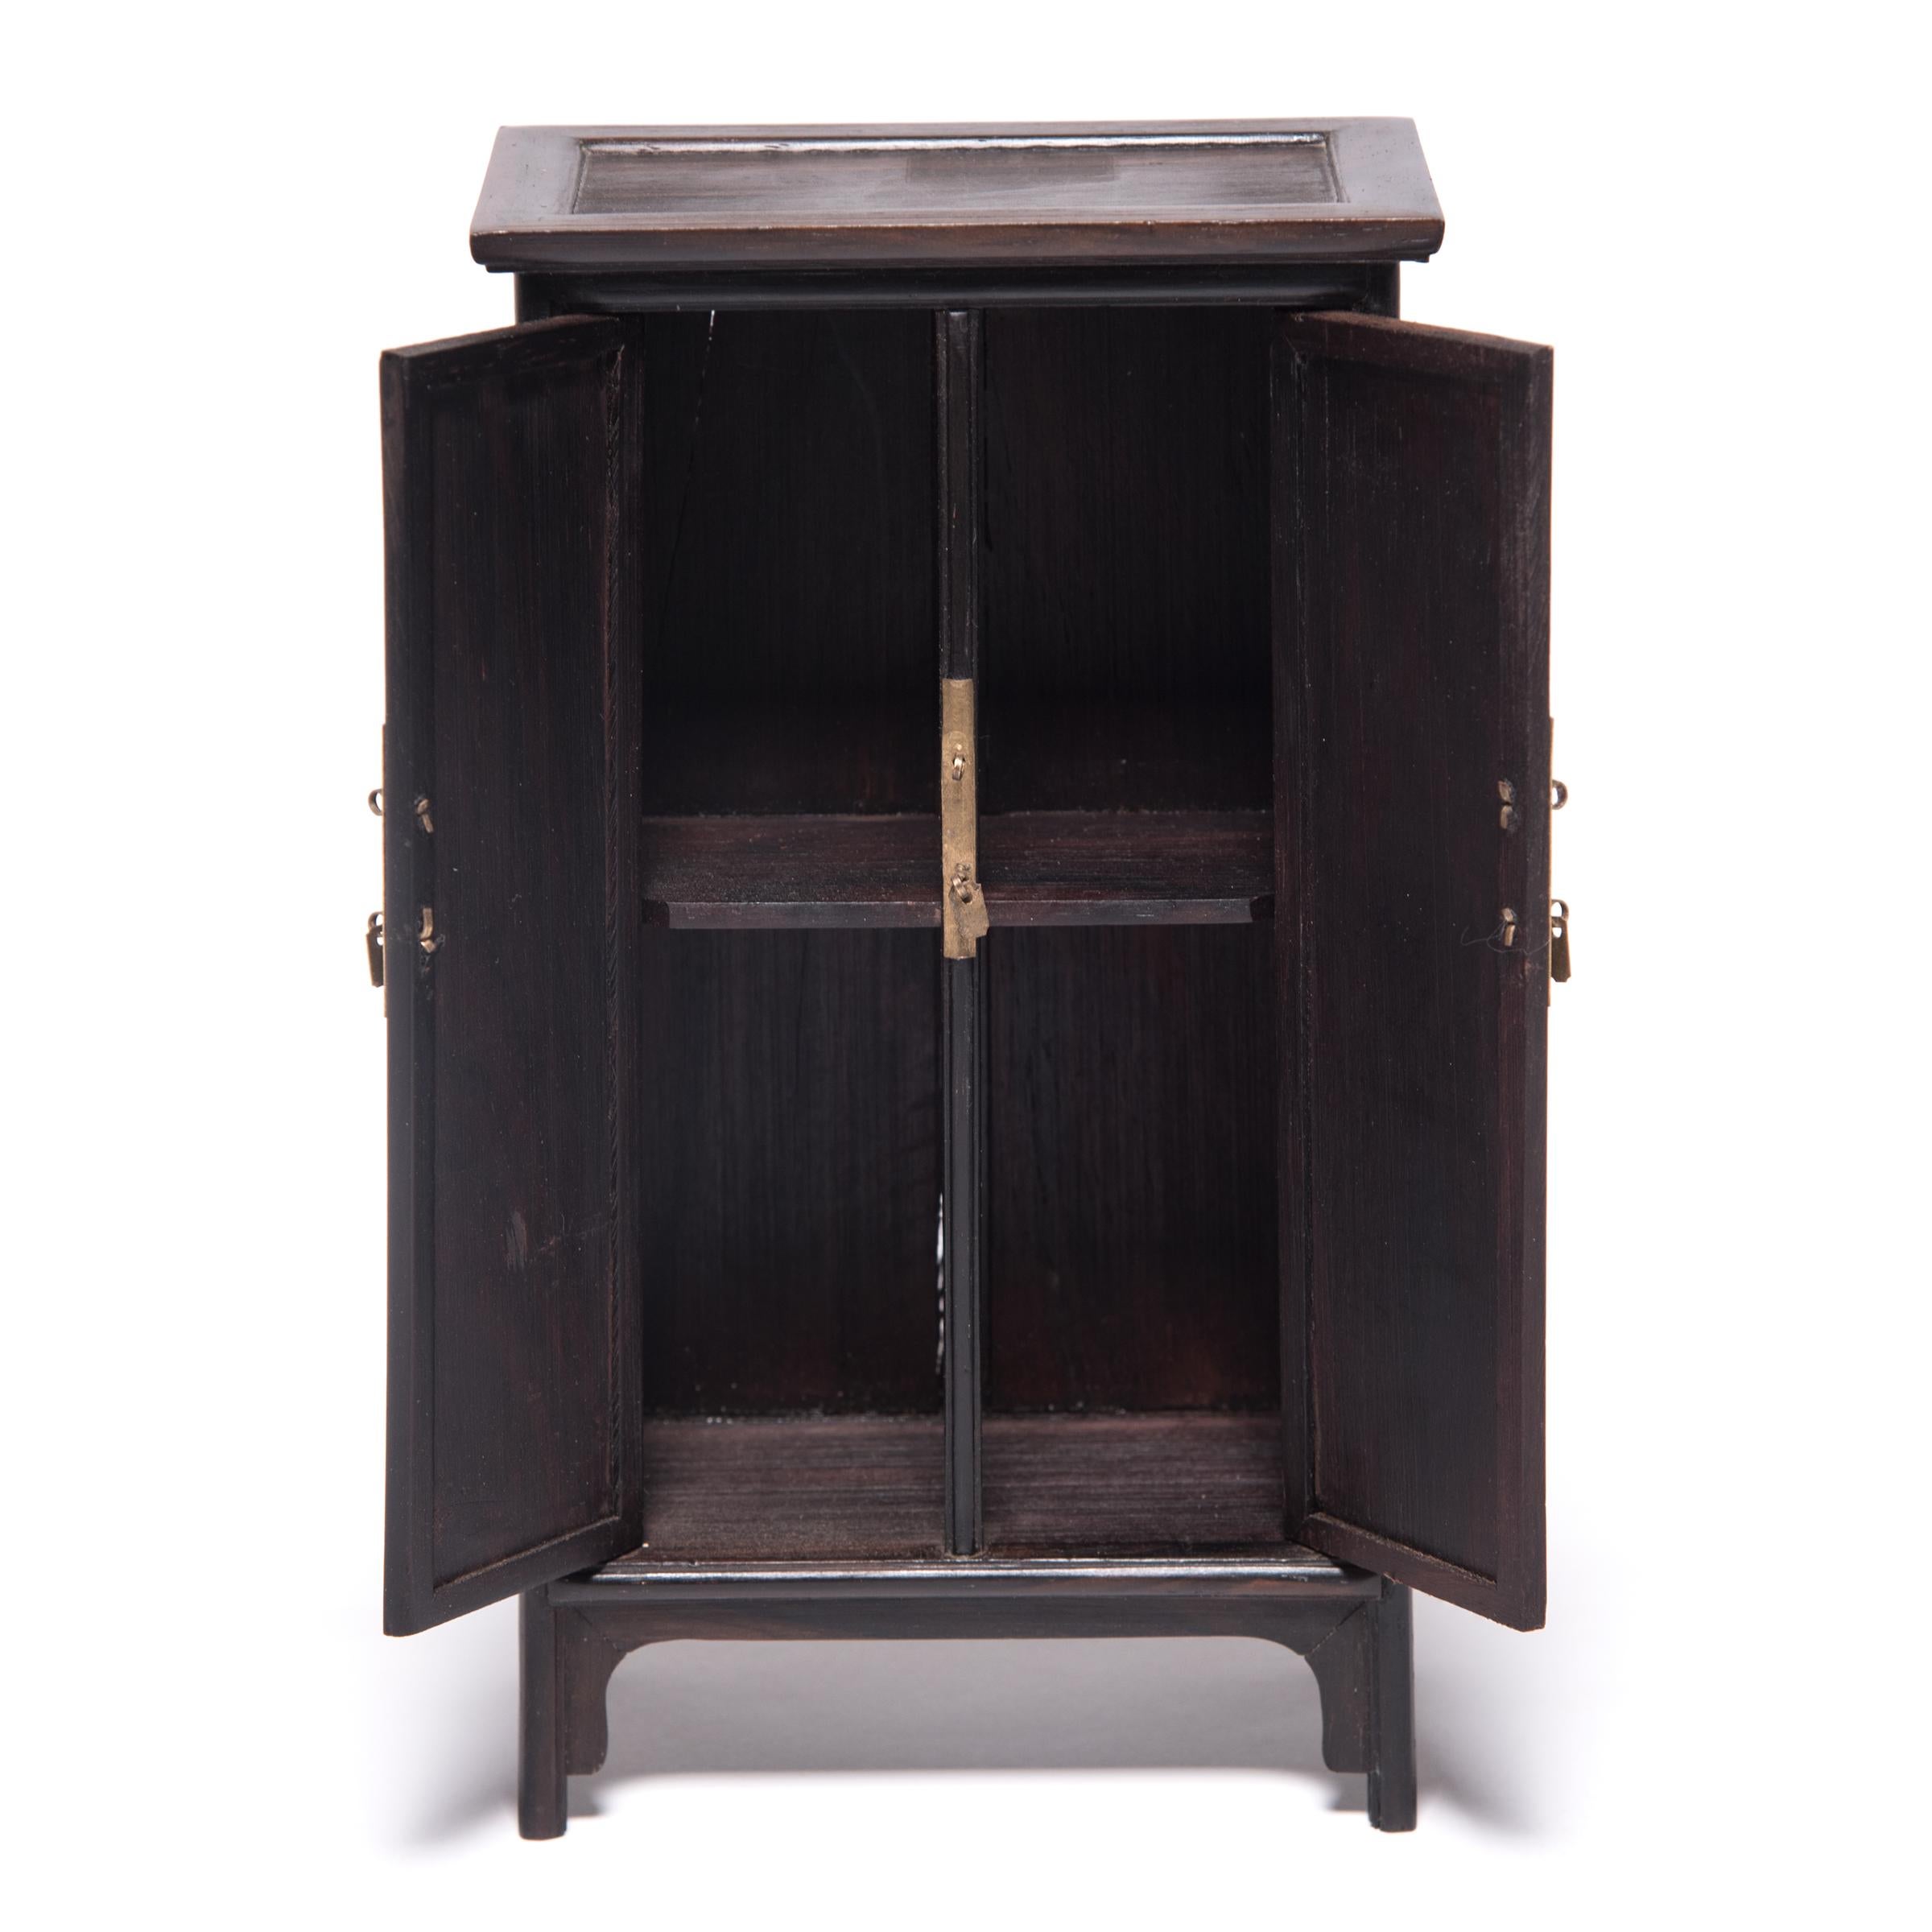 A full size cabinet with this level of workmanship would be an incredible find, but this beautiful piece of furniture - at only eight inches tall - is perfectly constructed down to the tiniest minutia. The cabinet was made in northern China out of